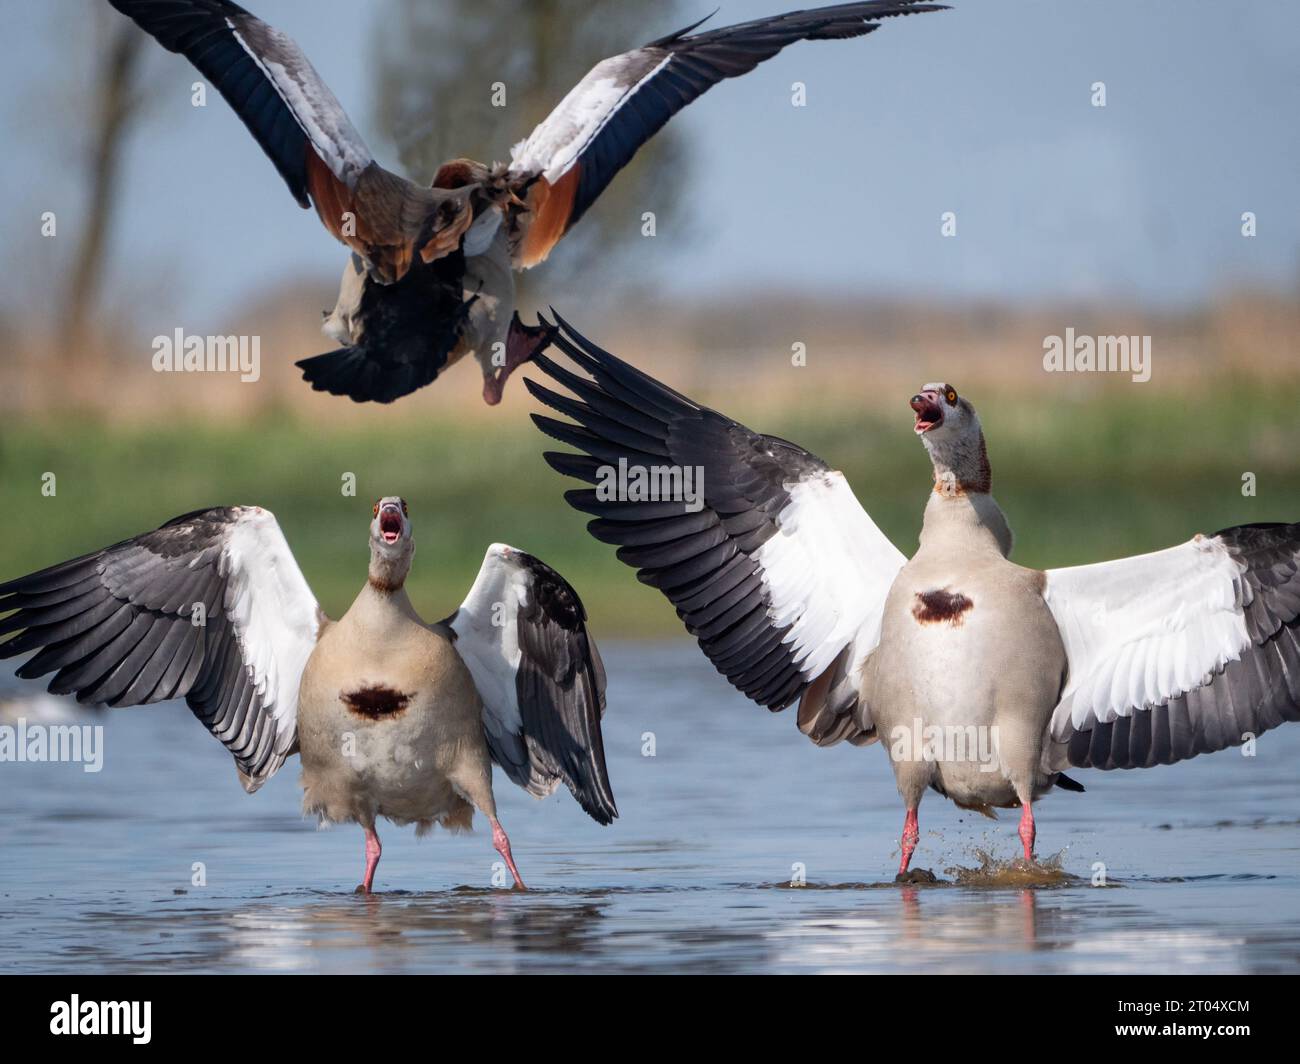 Egyptian goose (Alopochen aegyptiacus), pair; acting agressive against another bird trying to land, Netherlands, Northern Netherlands, Zolderland Stock Photo